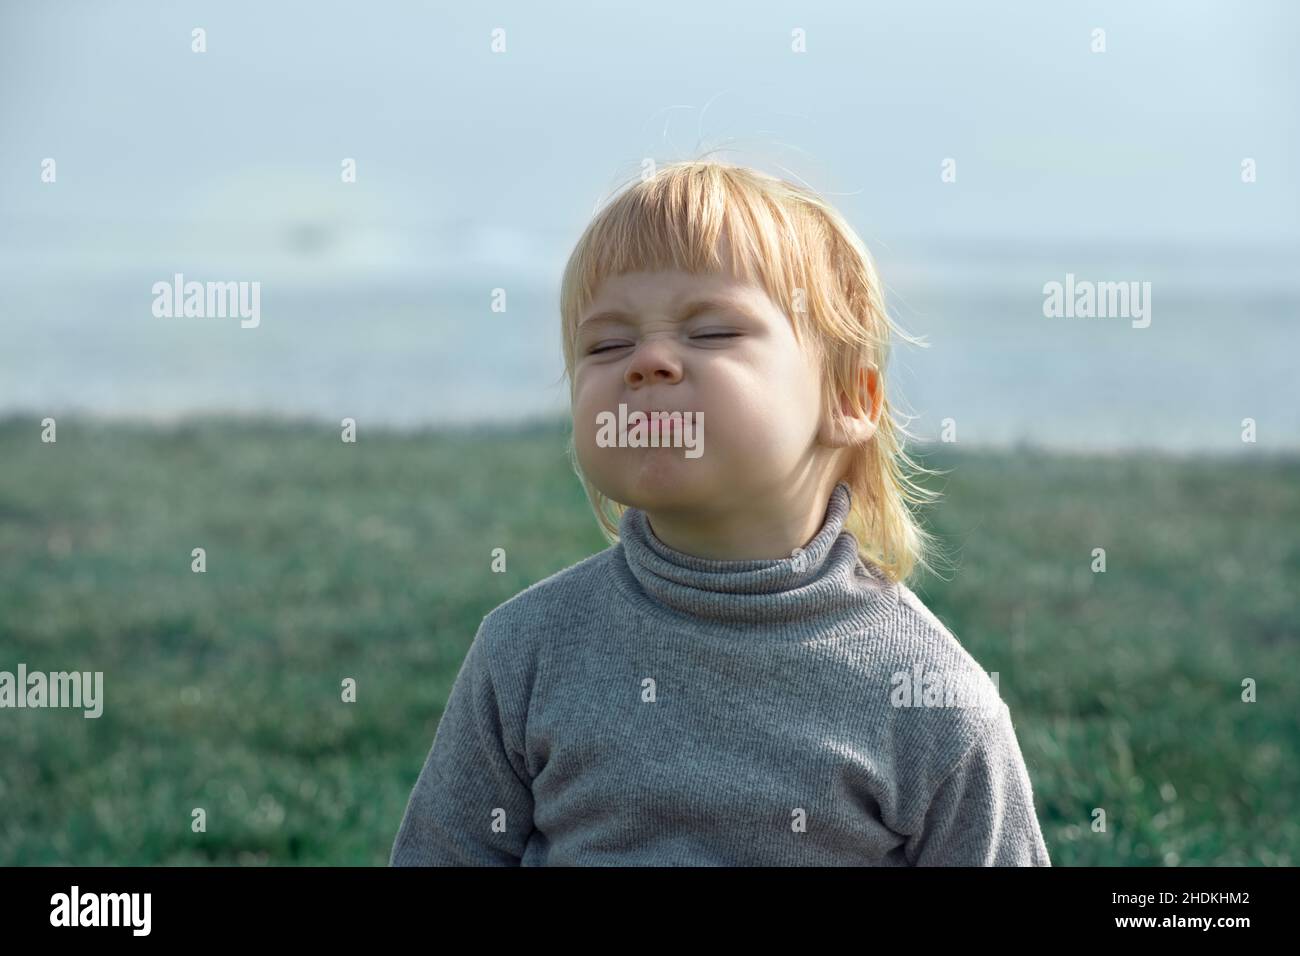 Child wrinkles face expressing dissatisfaction, face portrait Stock Photo